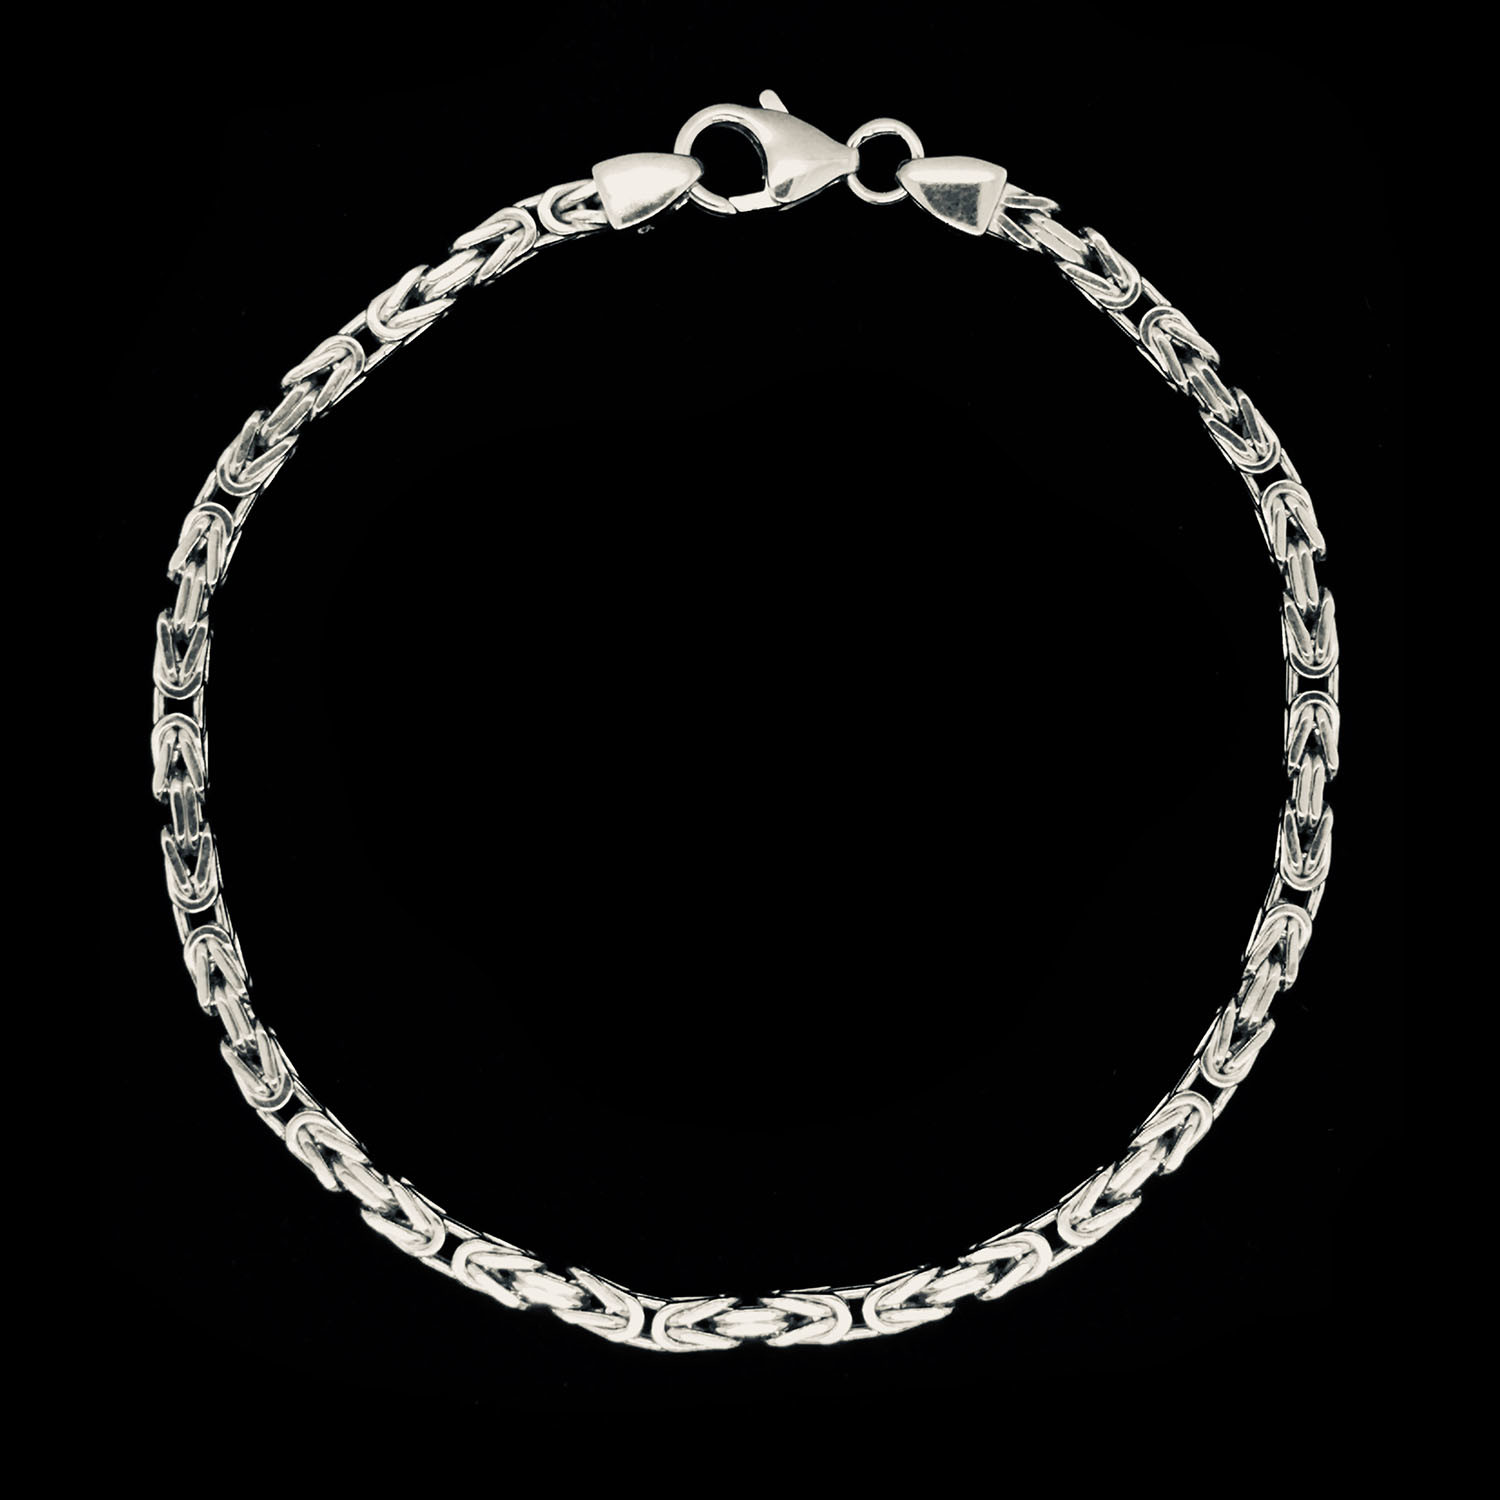 925 Solid Sterling Silver Square Byzantine Chain Bracelet // 8.5